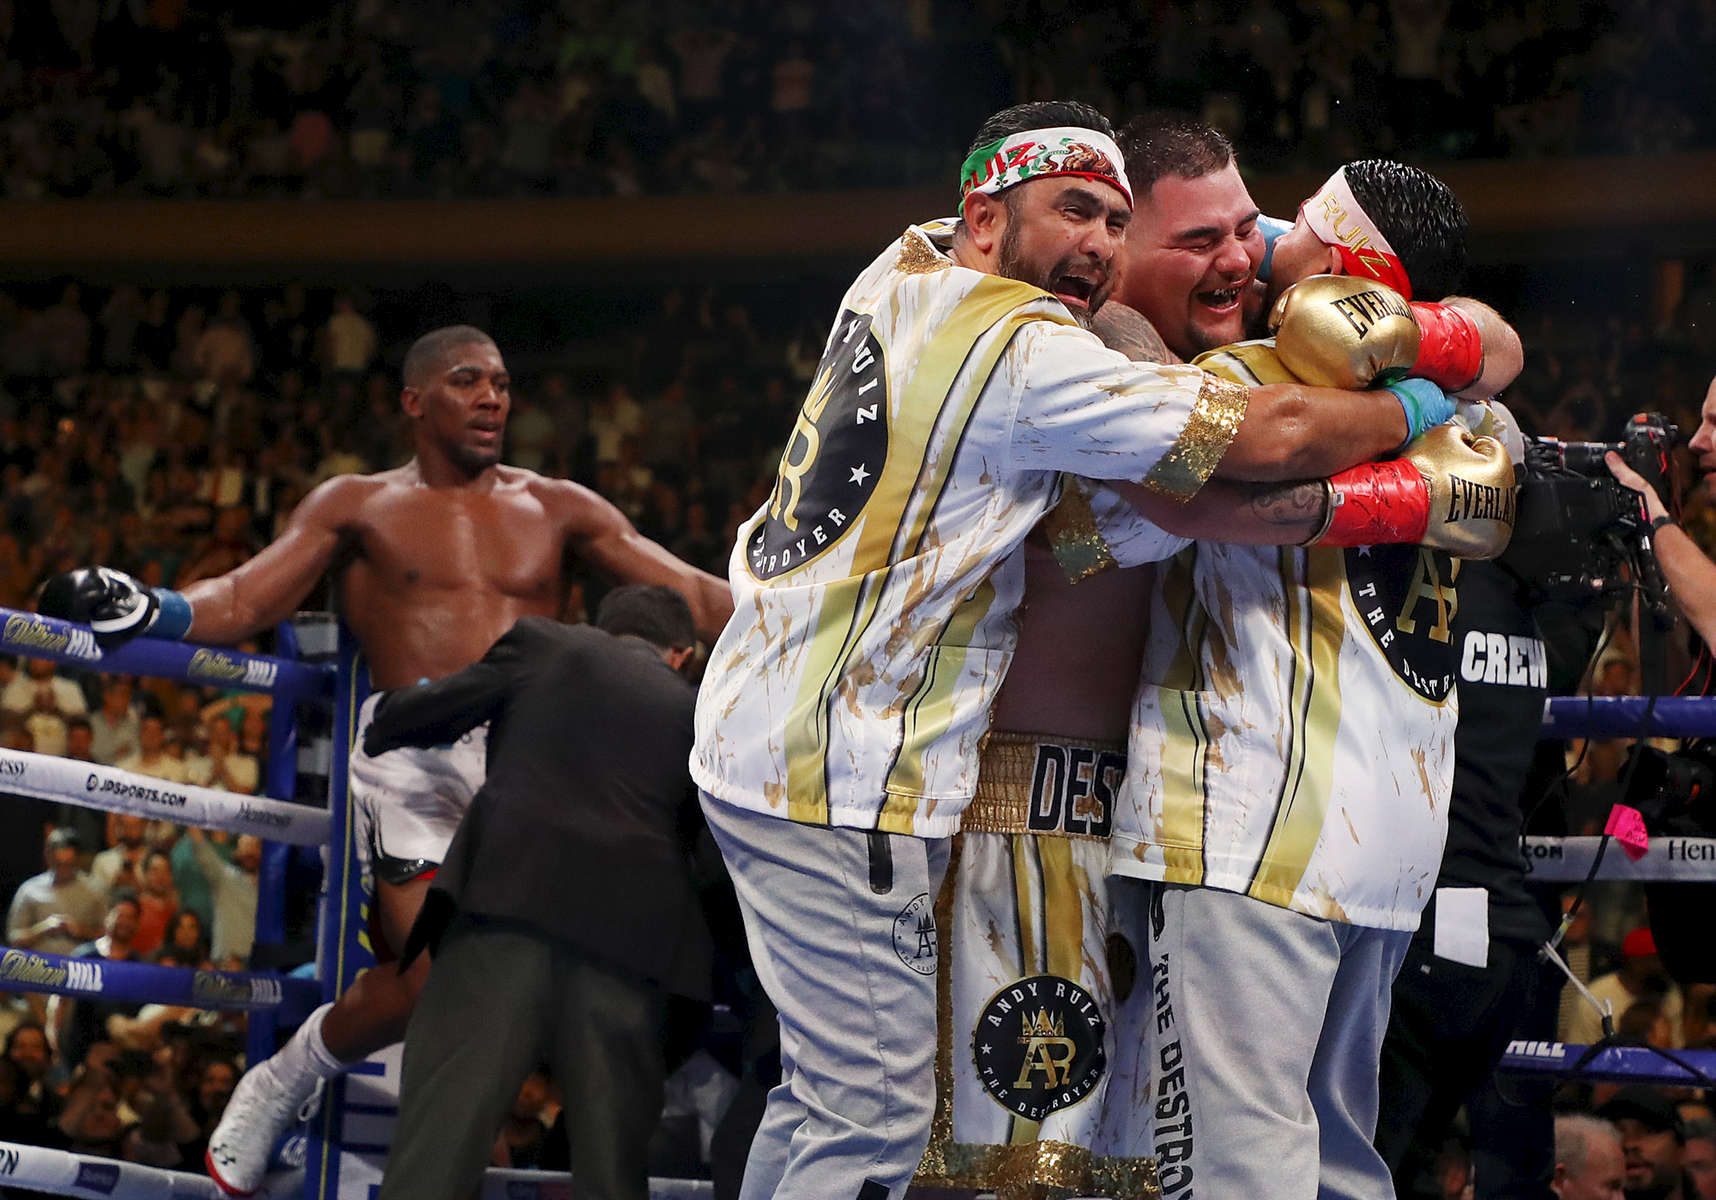 Andy Ruiz Jr celebrates his seventh round tko against  Anthony Joshua after their IBF/WBA/WBO heavyweight title fight at Madison Square Garden on June 01, 2019 in New York City.